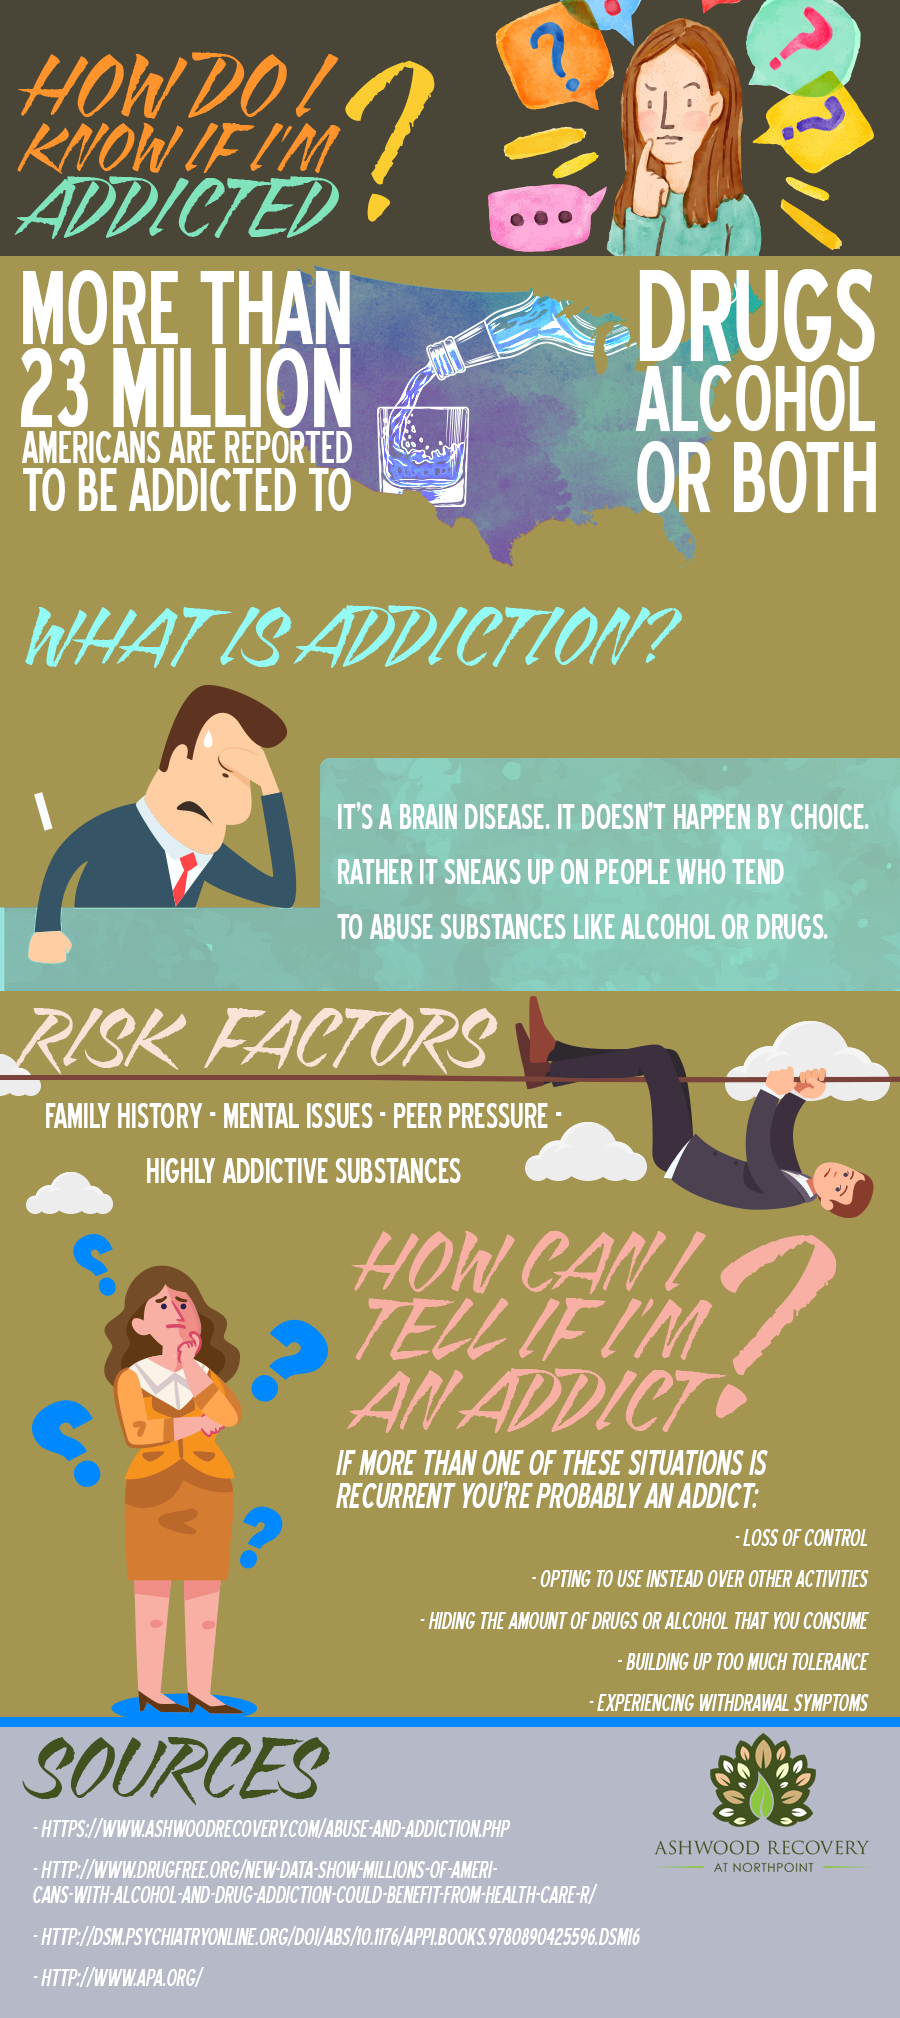 More than 23 million americans are reported to be addicted to drugs, alcohol or both. Addiction is a brain disease. it does not happen by choice. rather it sneaks up on people who tend to abuse substances like alcohol or drugs. How can I tell if I am an addict? You are probably an addict if you have loss of control, you are opting to use instead over other activities, you hide the amount of drugs or alcohol that you consume, you build up to much tolerance and you are experiencing withdrawal symptoms. to answer to the questions "What is addiction?","what are the risk factors to be addicted?", "How can I tell if I am an addicted?" and "How do I know if I am addicted?" we have taken as sources https://www.ashwoodrecovery.com/abuse-and-addiction.php, http://wwww.drugfree.org/new-data-show-millions-of-americans-with-alcohol-and-drug-addiction-could-benefit-from-health-care-r/,http://www.dsm.psychiatryonline.org/doi/10.1176/applbooks.9780890425596.dsm16 and http://www.apa.org/